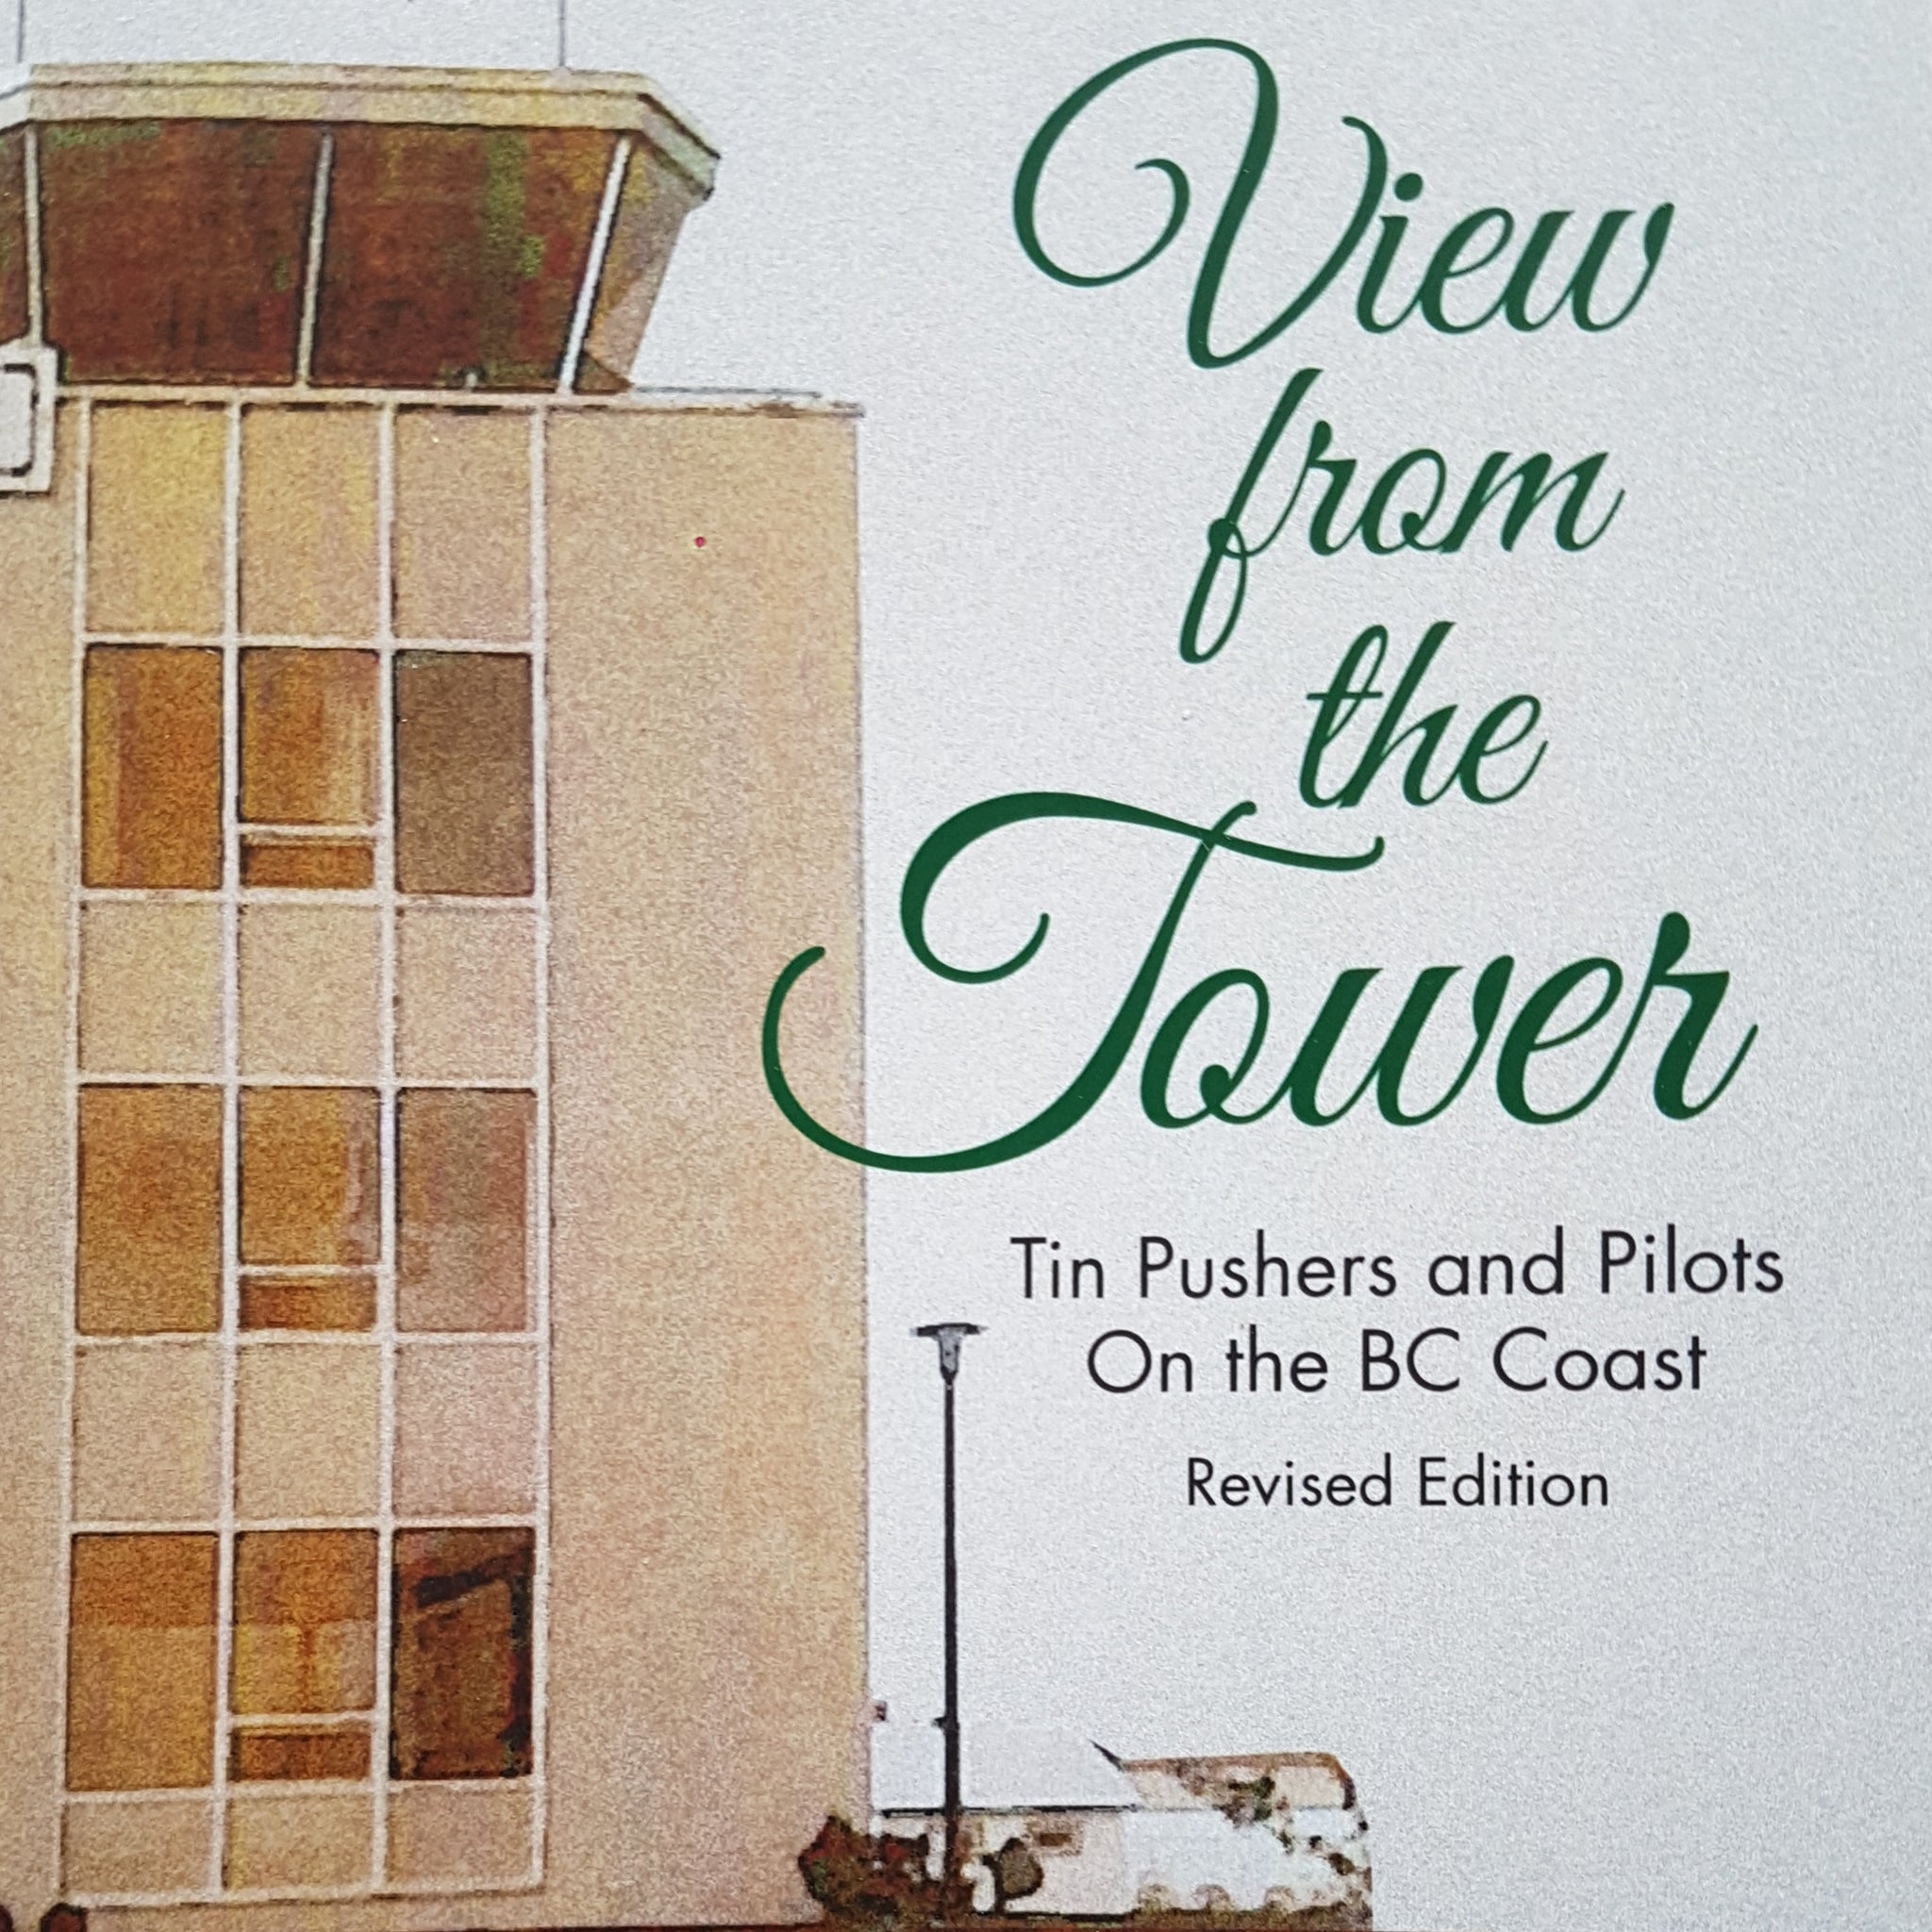 View from the Tower *Revised Edition* (by Grant B Evans)